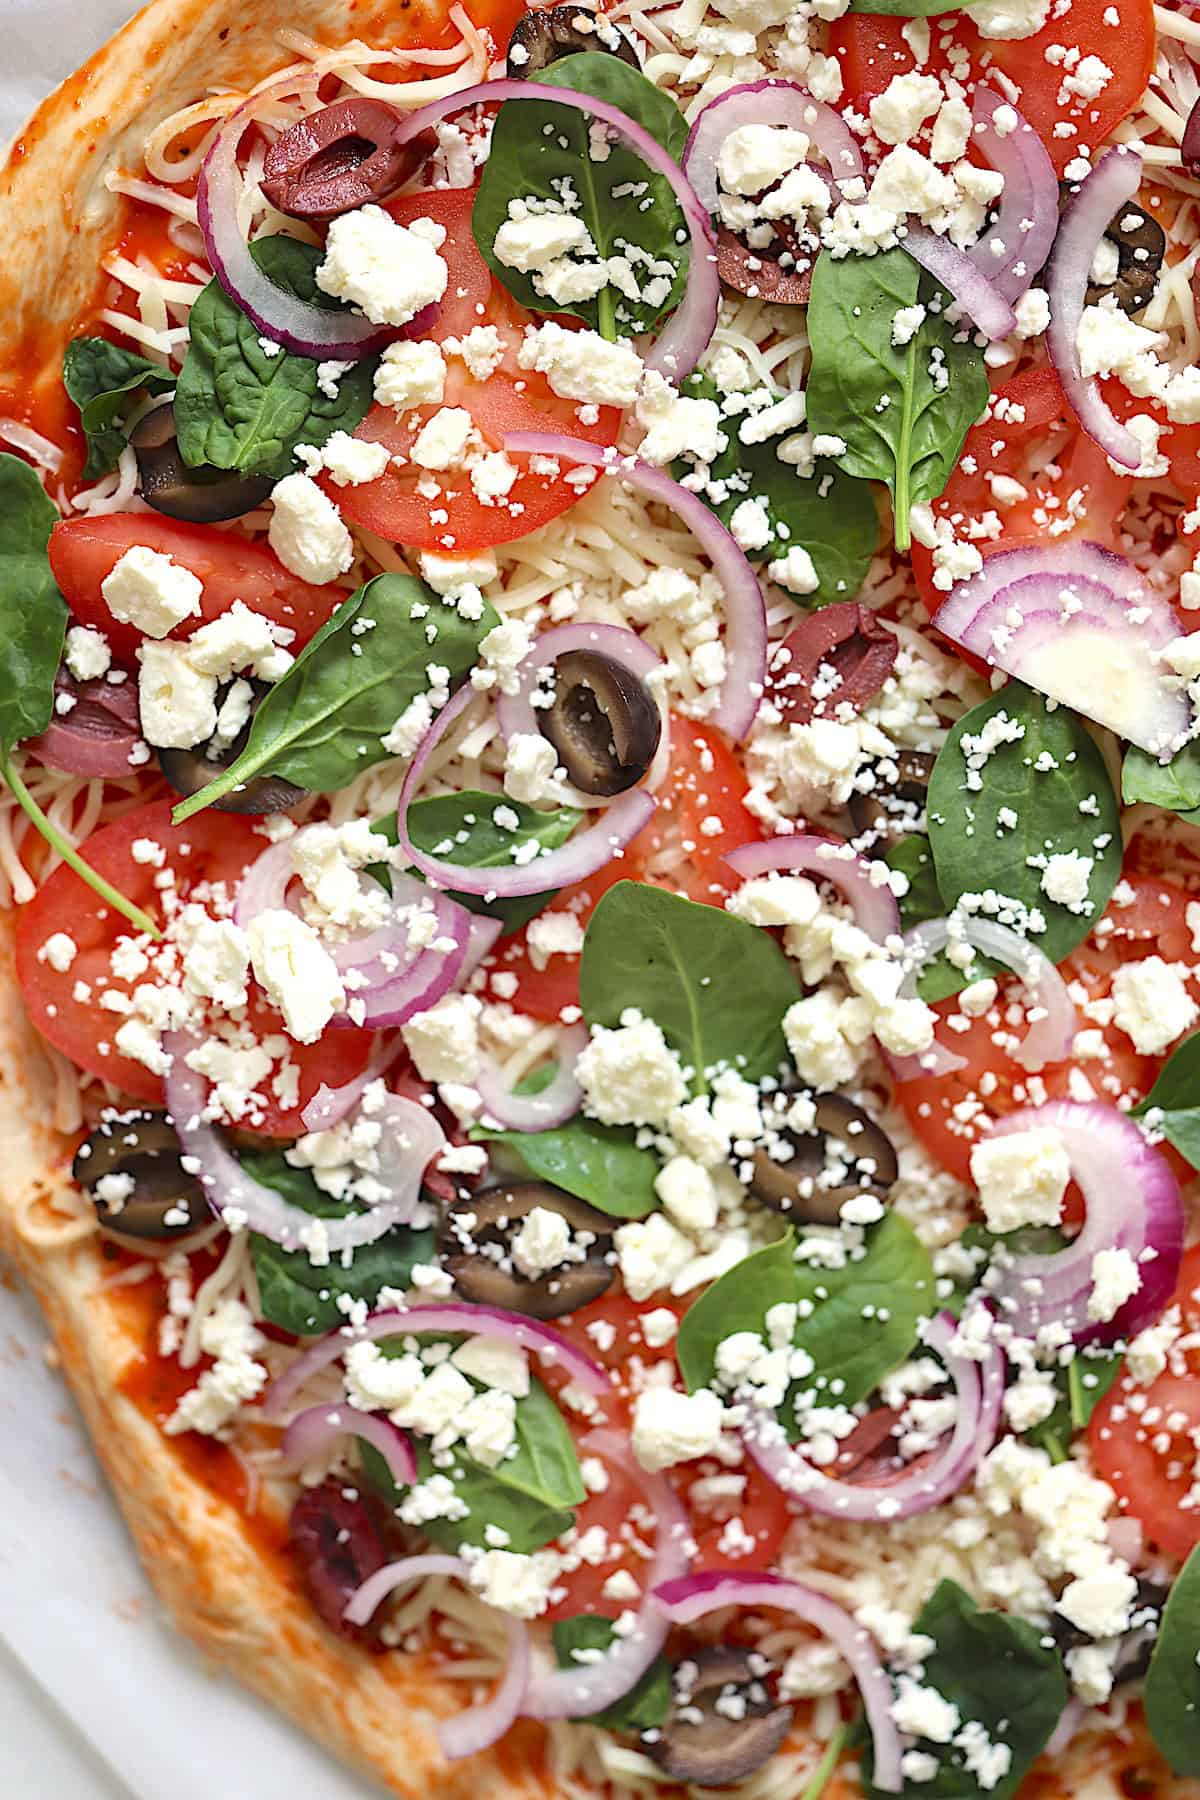 fresh and wholesome ingredients on pizza